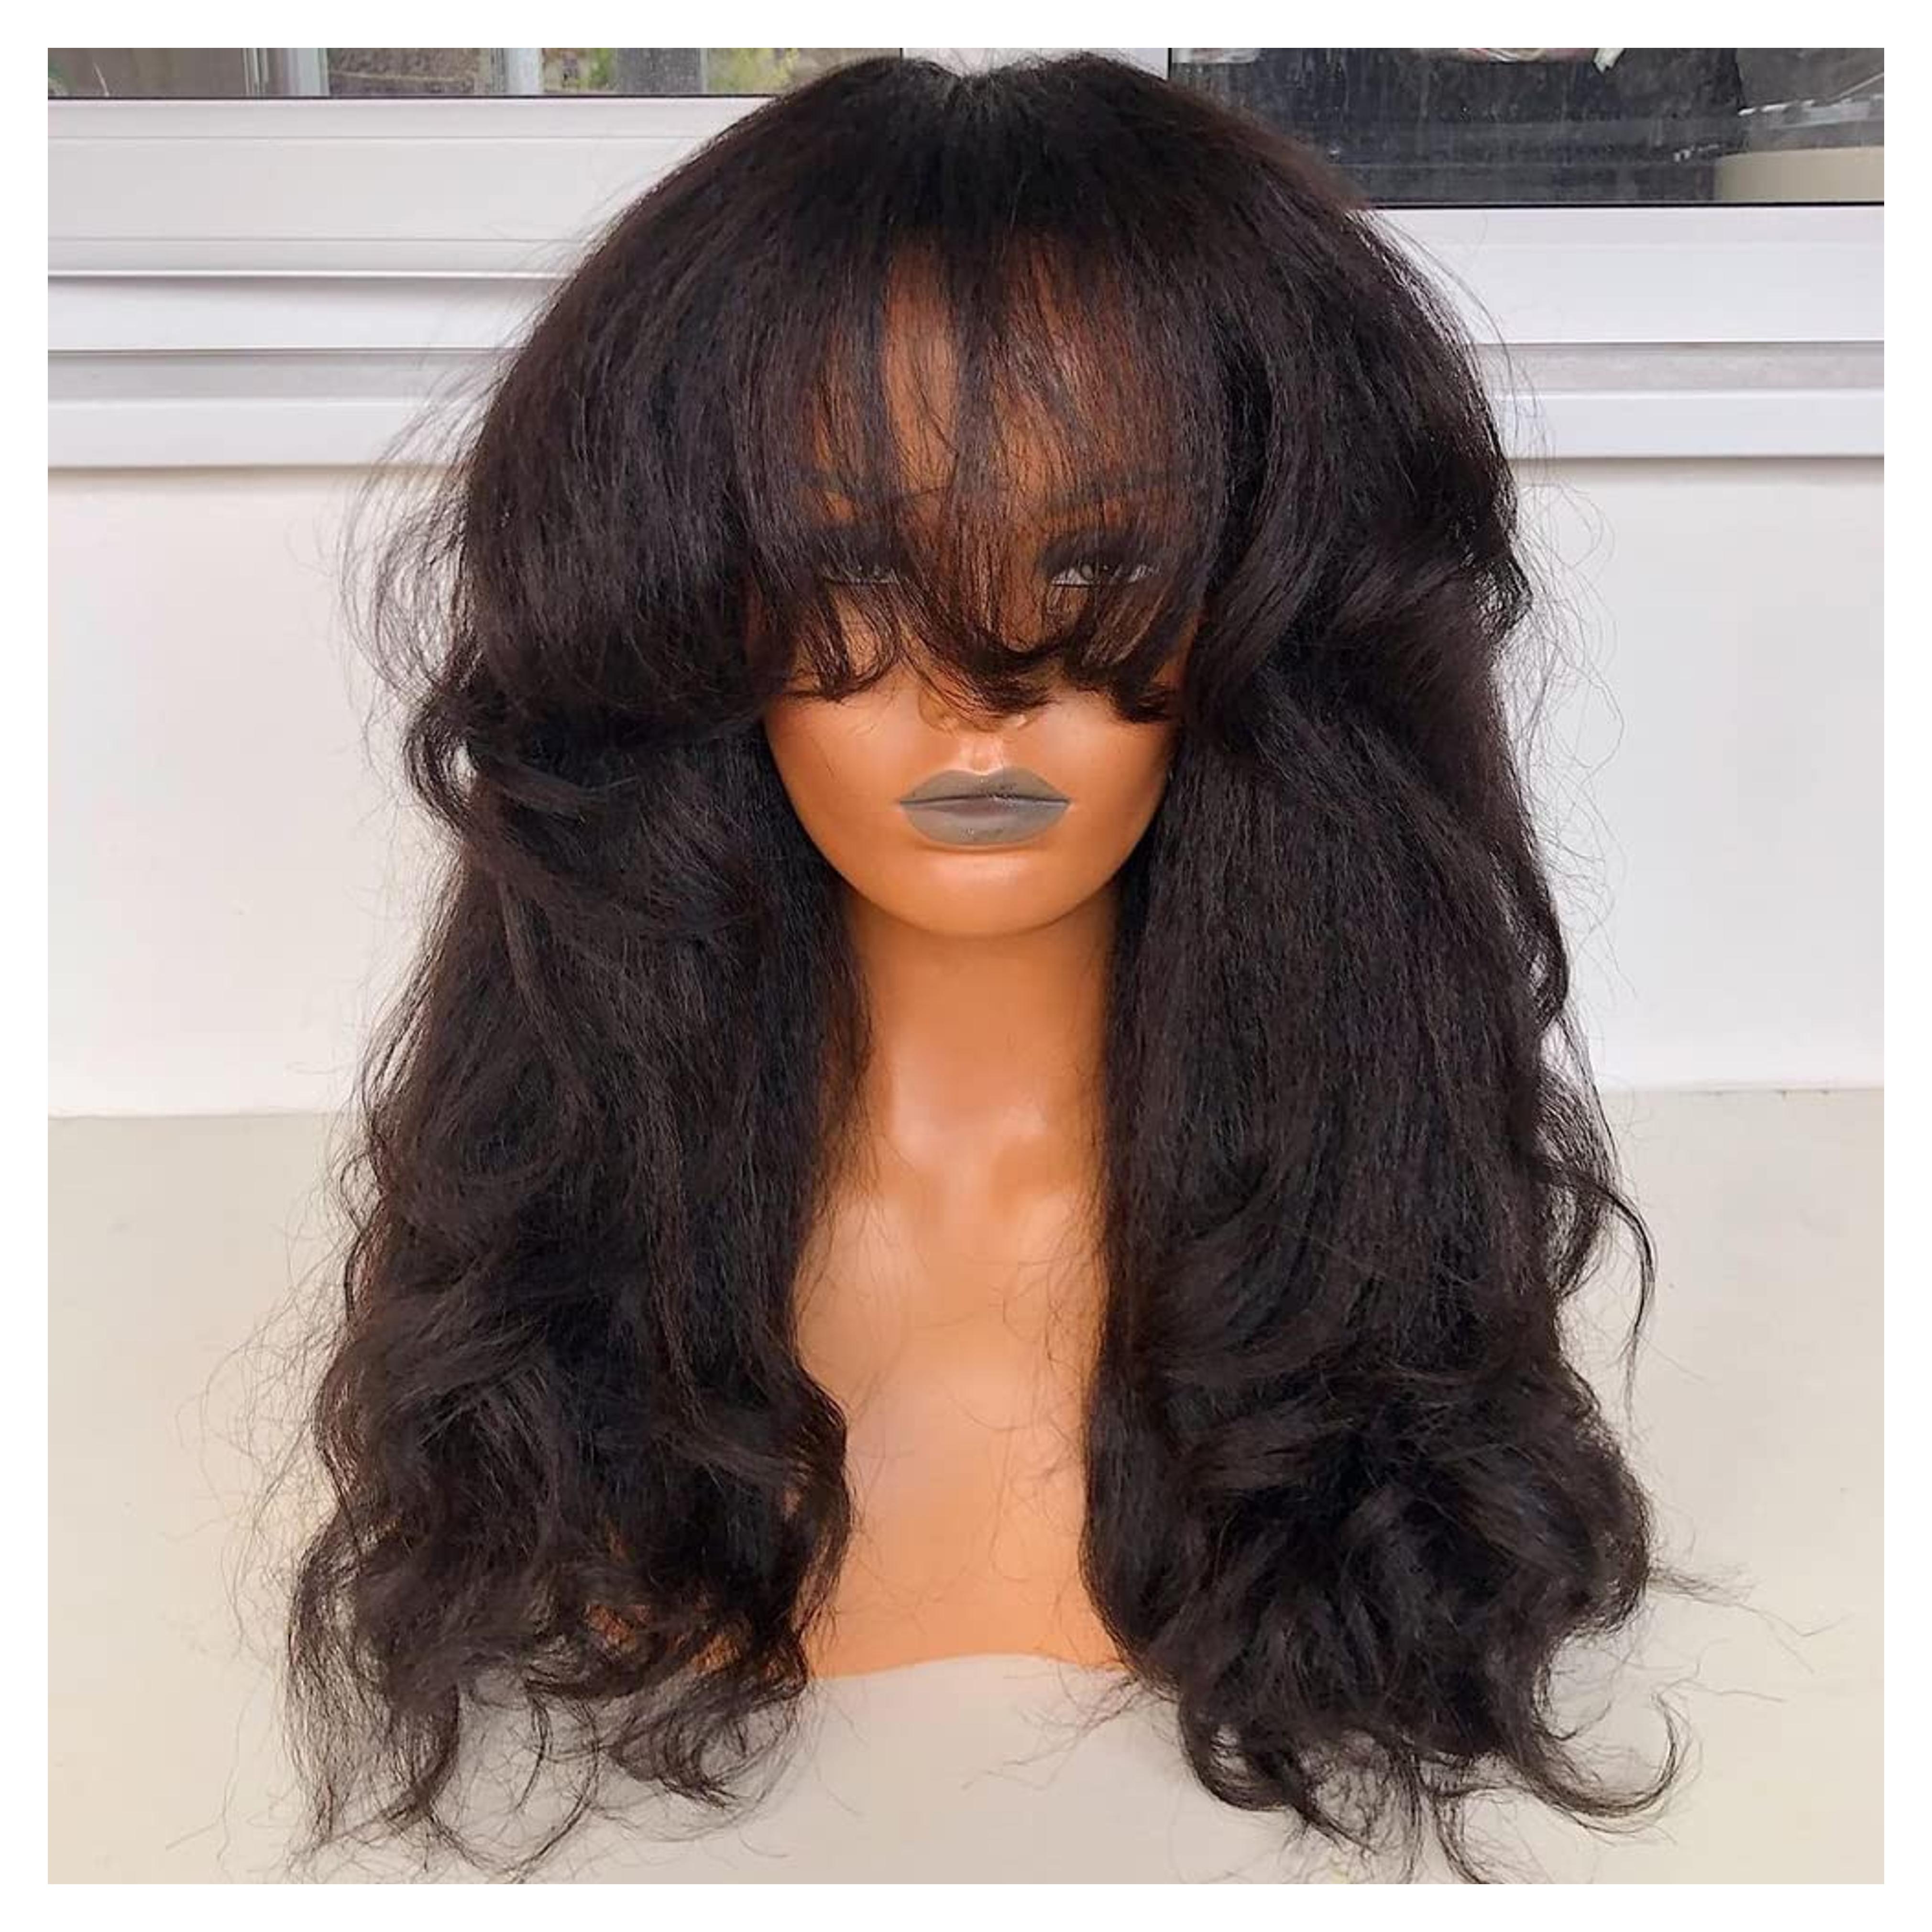 Amazon.com : JZhair 200 Density Yaki Wavy Wigs Brazilian Human Hair Scalp Top Full Machine Made Wig Yaki Wavy With Bangs Remy Human Hair For Women Natural Color 16 Inch : Beauty & Personal Care